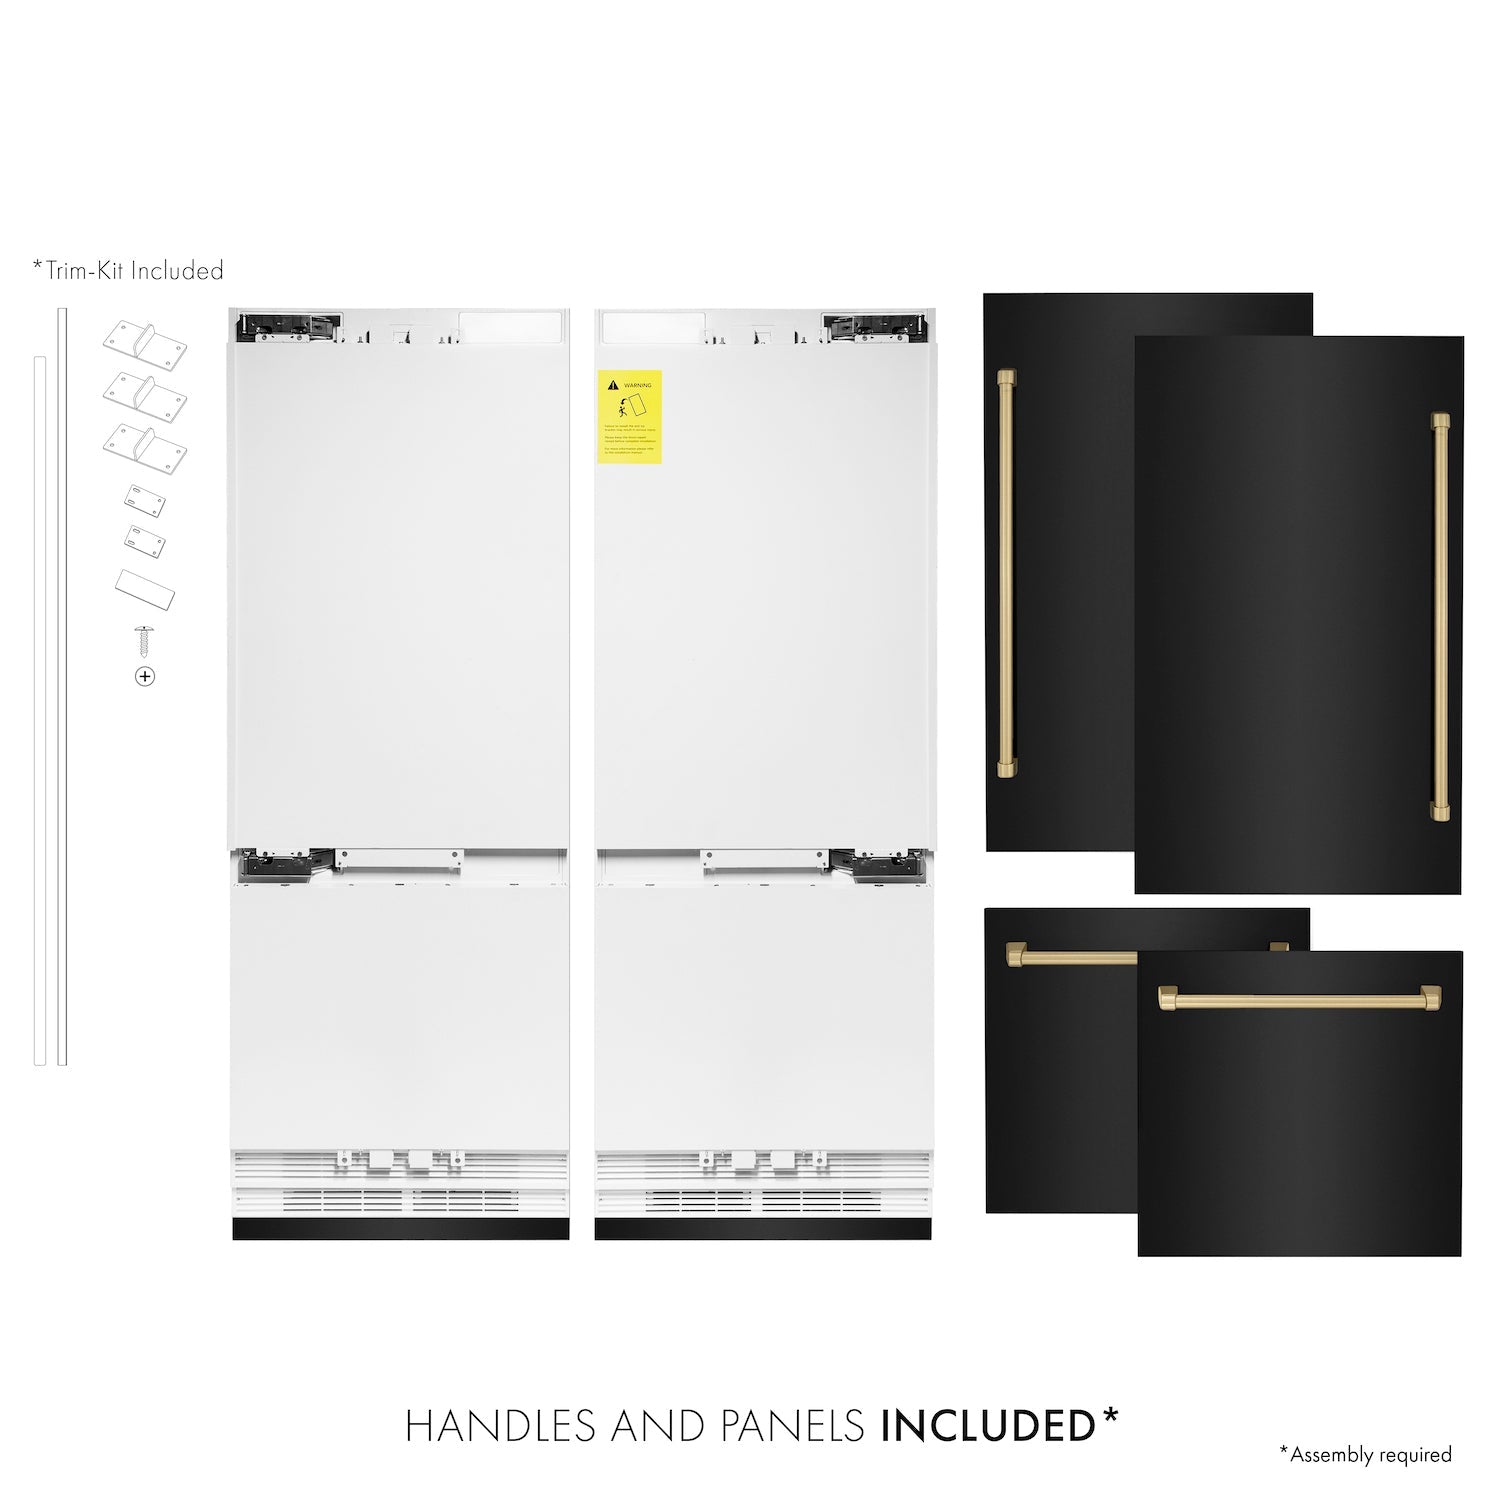 ZLINE 60" Autograph Edition Built-in 4-Door French Door Refrigerator - Black Stainless Steel with Champagne Bronze Accents, Internal Water and Ice Dispenser